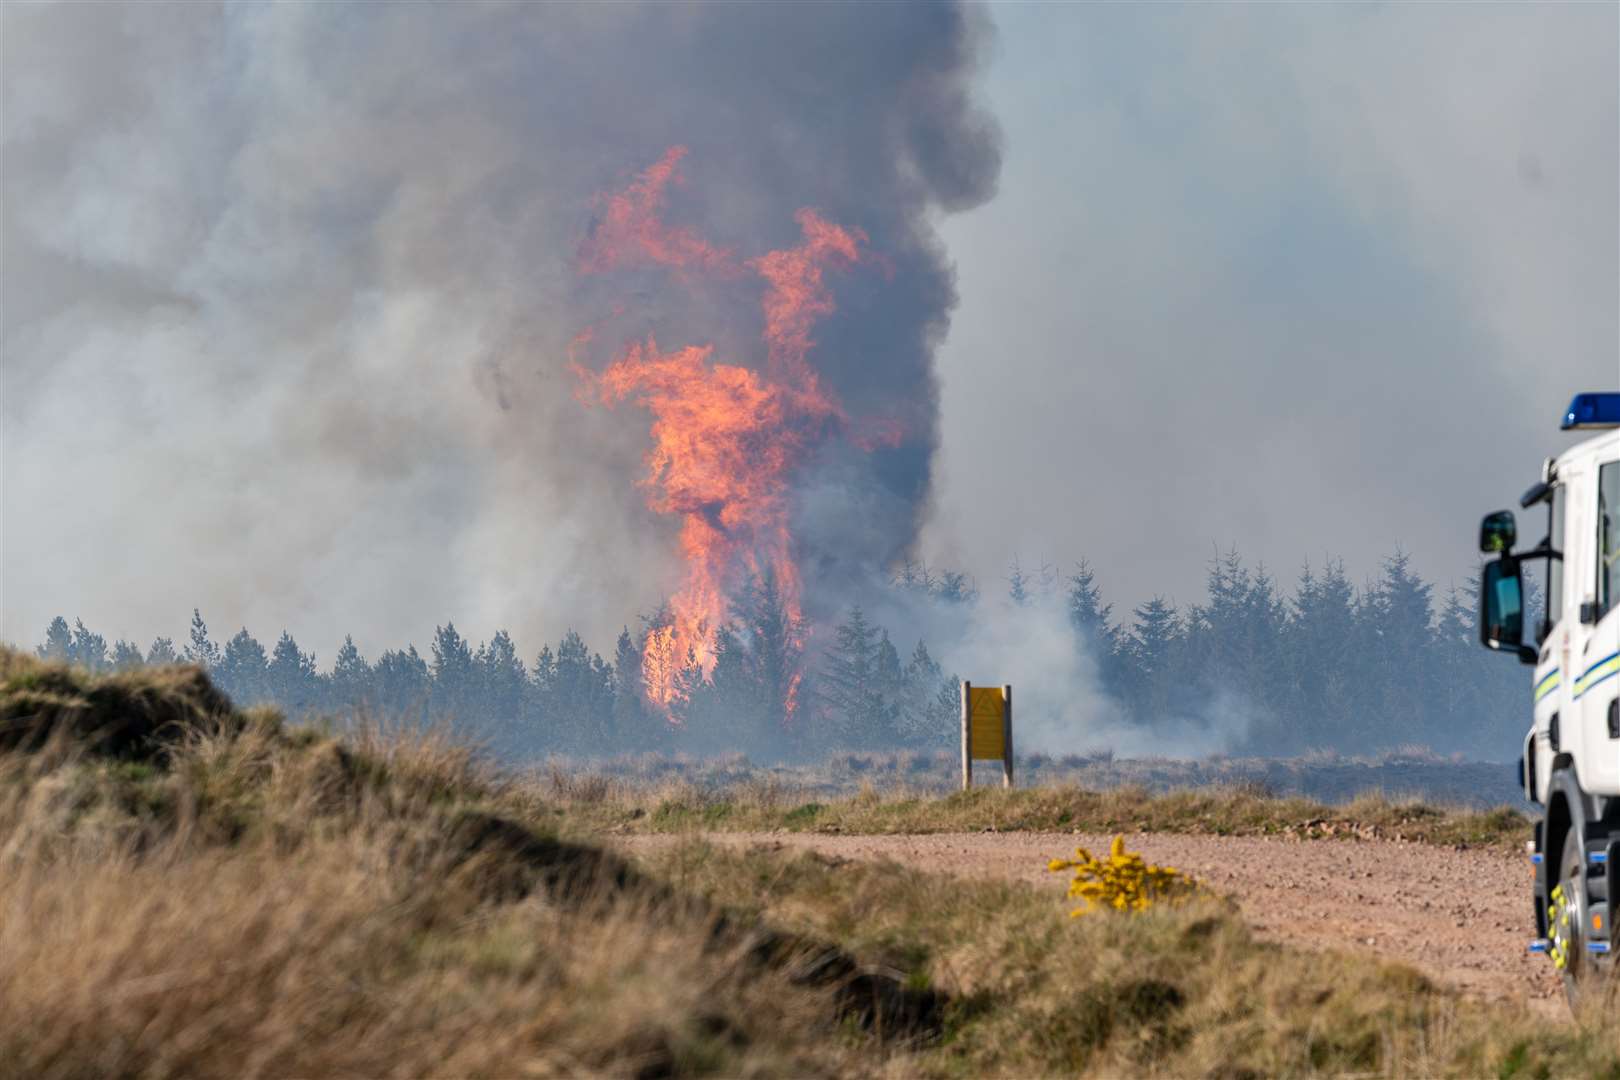 16 May 2019, Wildfire at Dunphail, Moray, Scotland, UK. This is a raging wildfire which has entered forrest areas and near a windfarm at Dunphail.